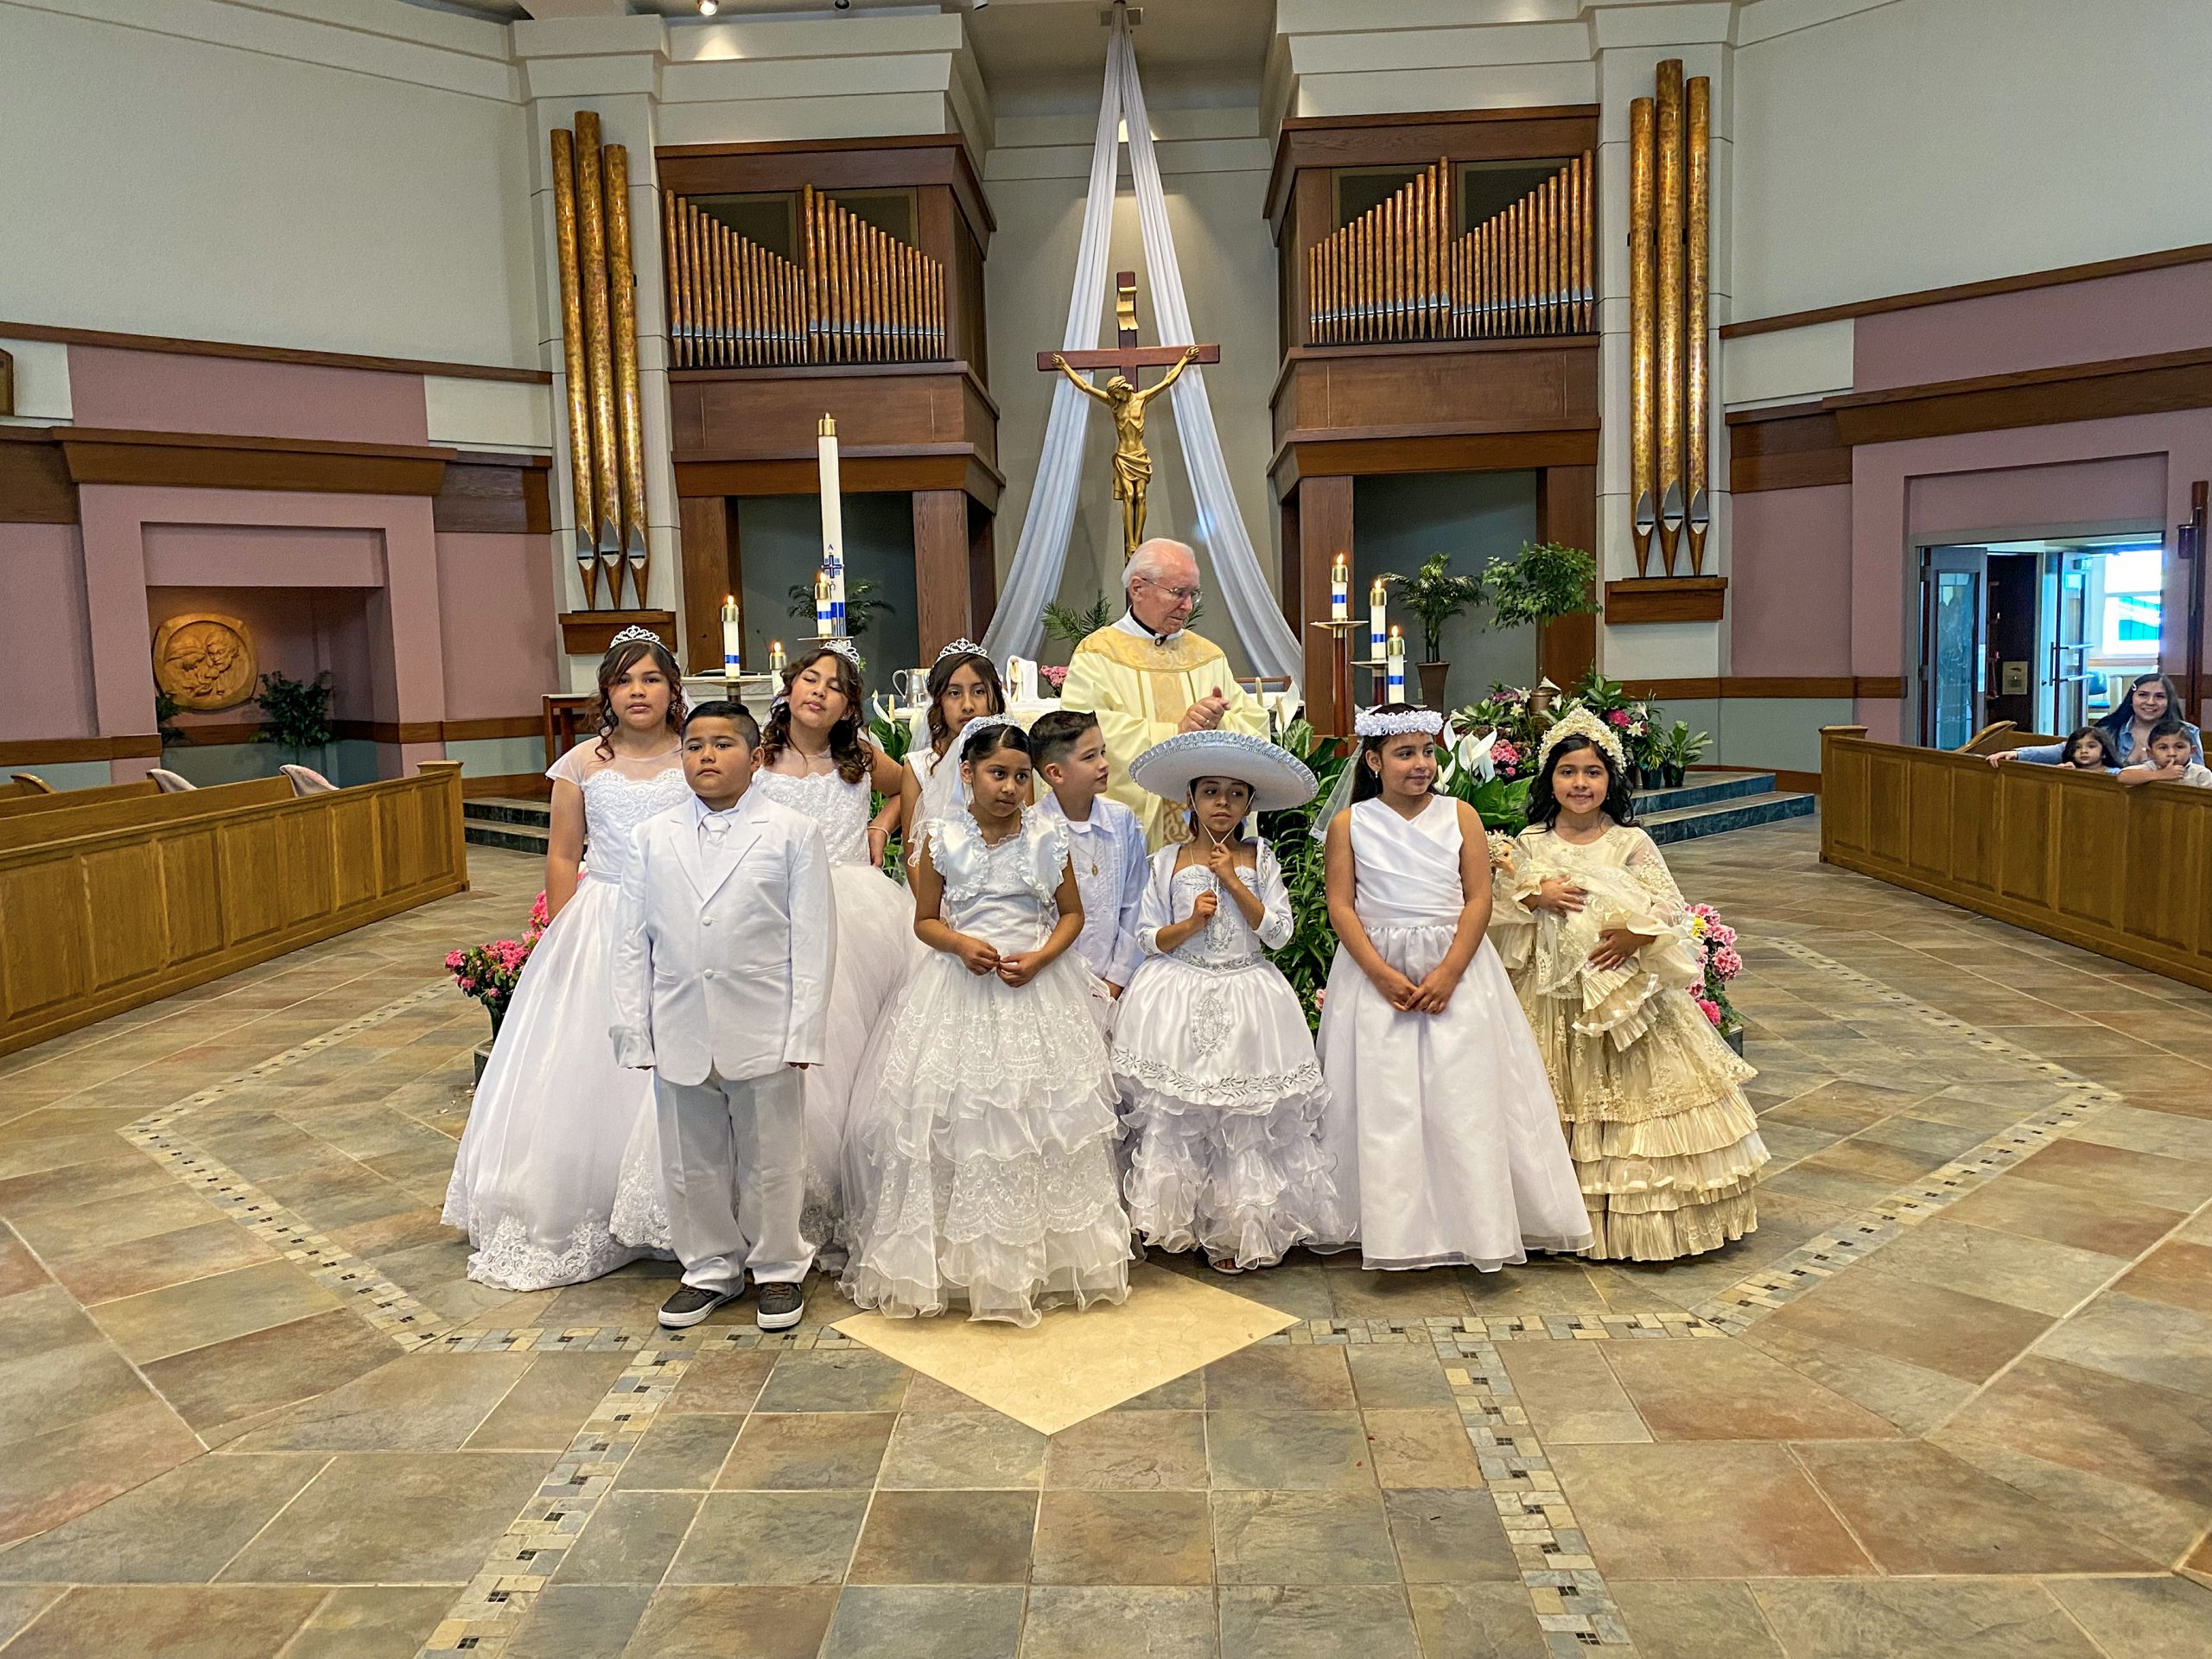 Fr Louie stands with a group of first communicants all dressed in their white dresses and suits.